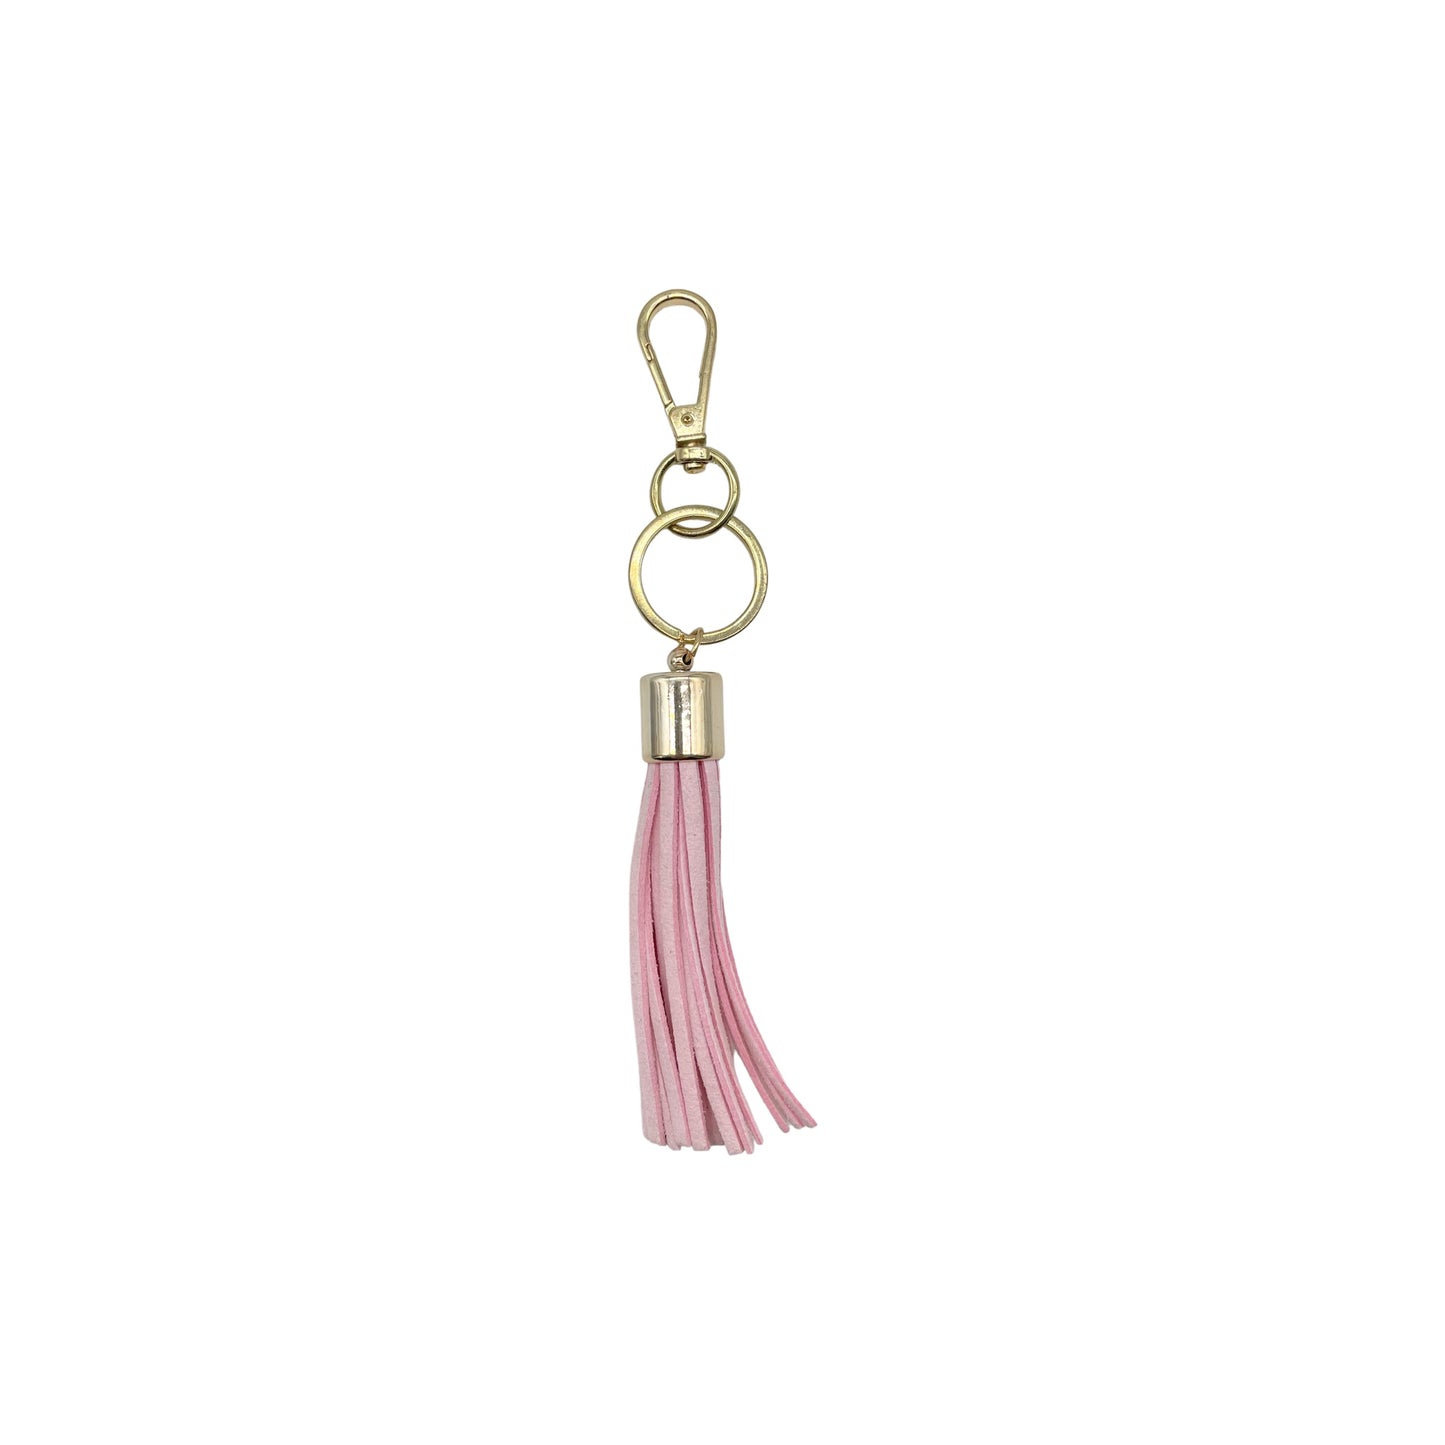 Pale Pink faux Suede Cord tassel keychain assortment.